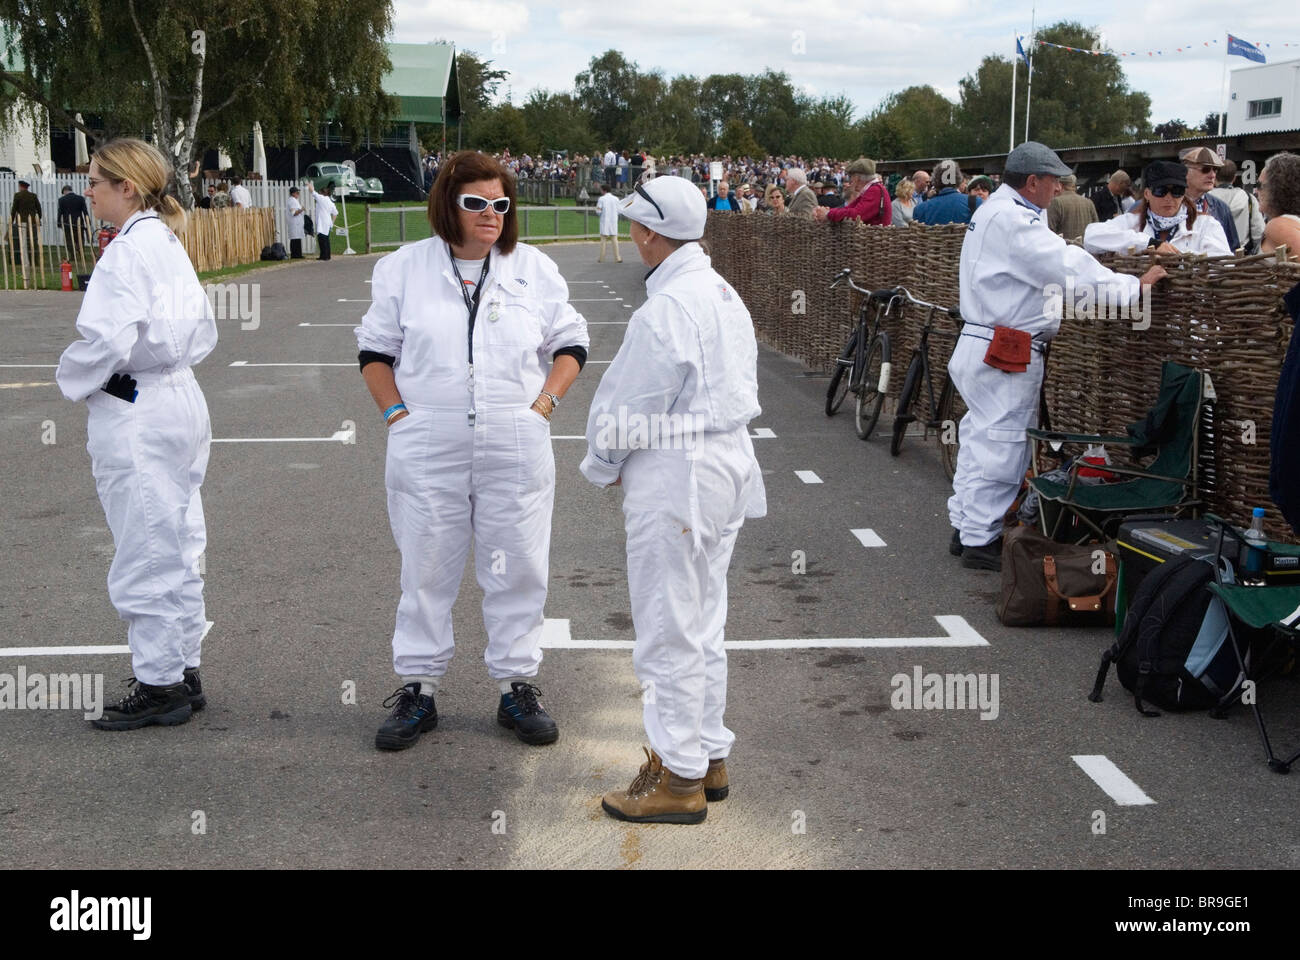 Women working in motor sport in the Pits. Traditionally a job a man would do. Goodwood Festival of Speed. Goodwood Sussex. UK. 2010, 2010s HOMER SYKES Stock Photo